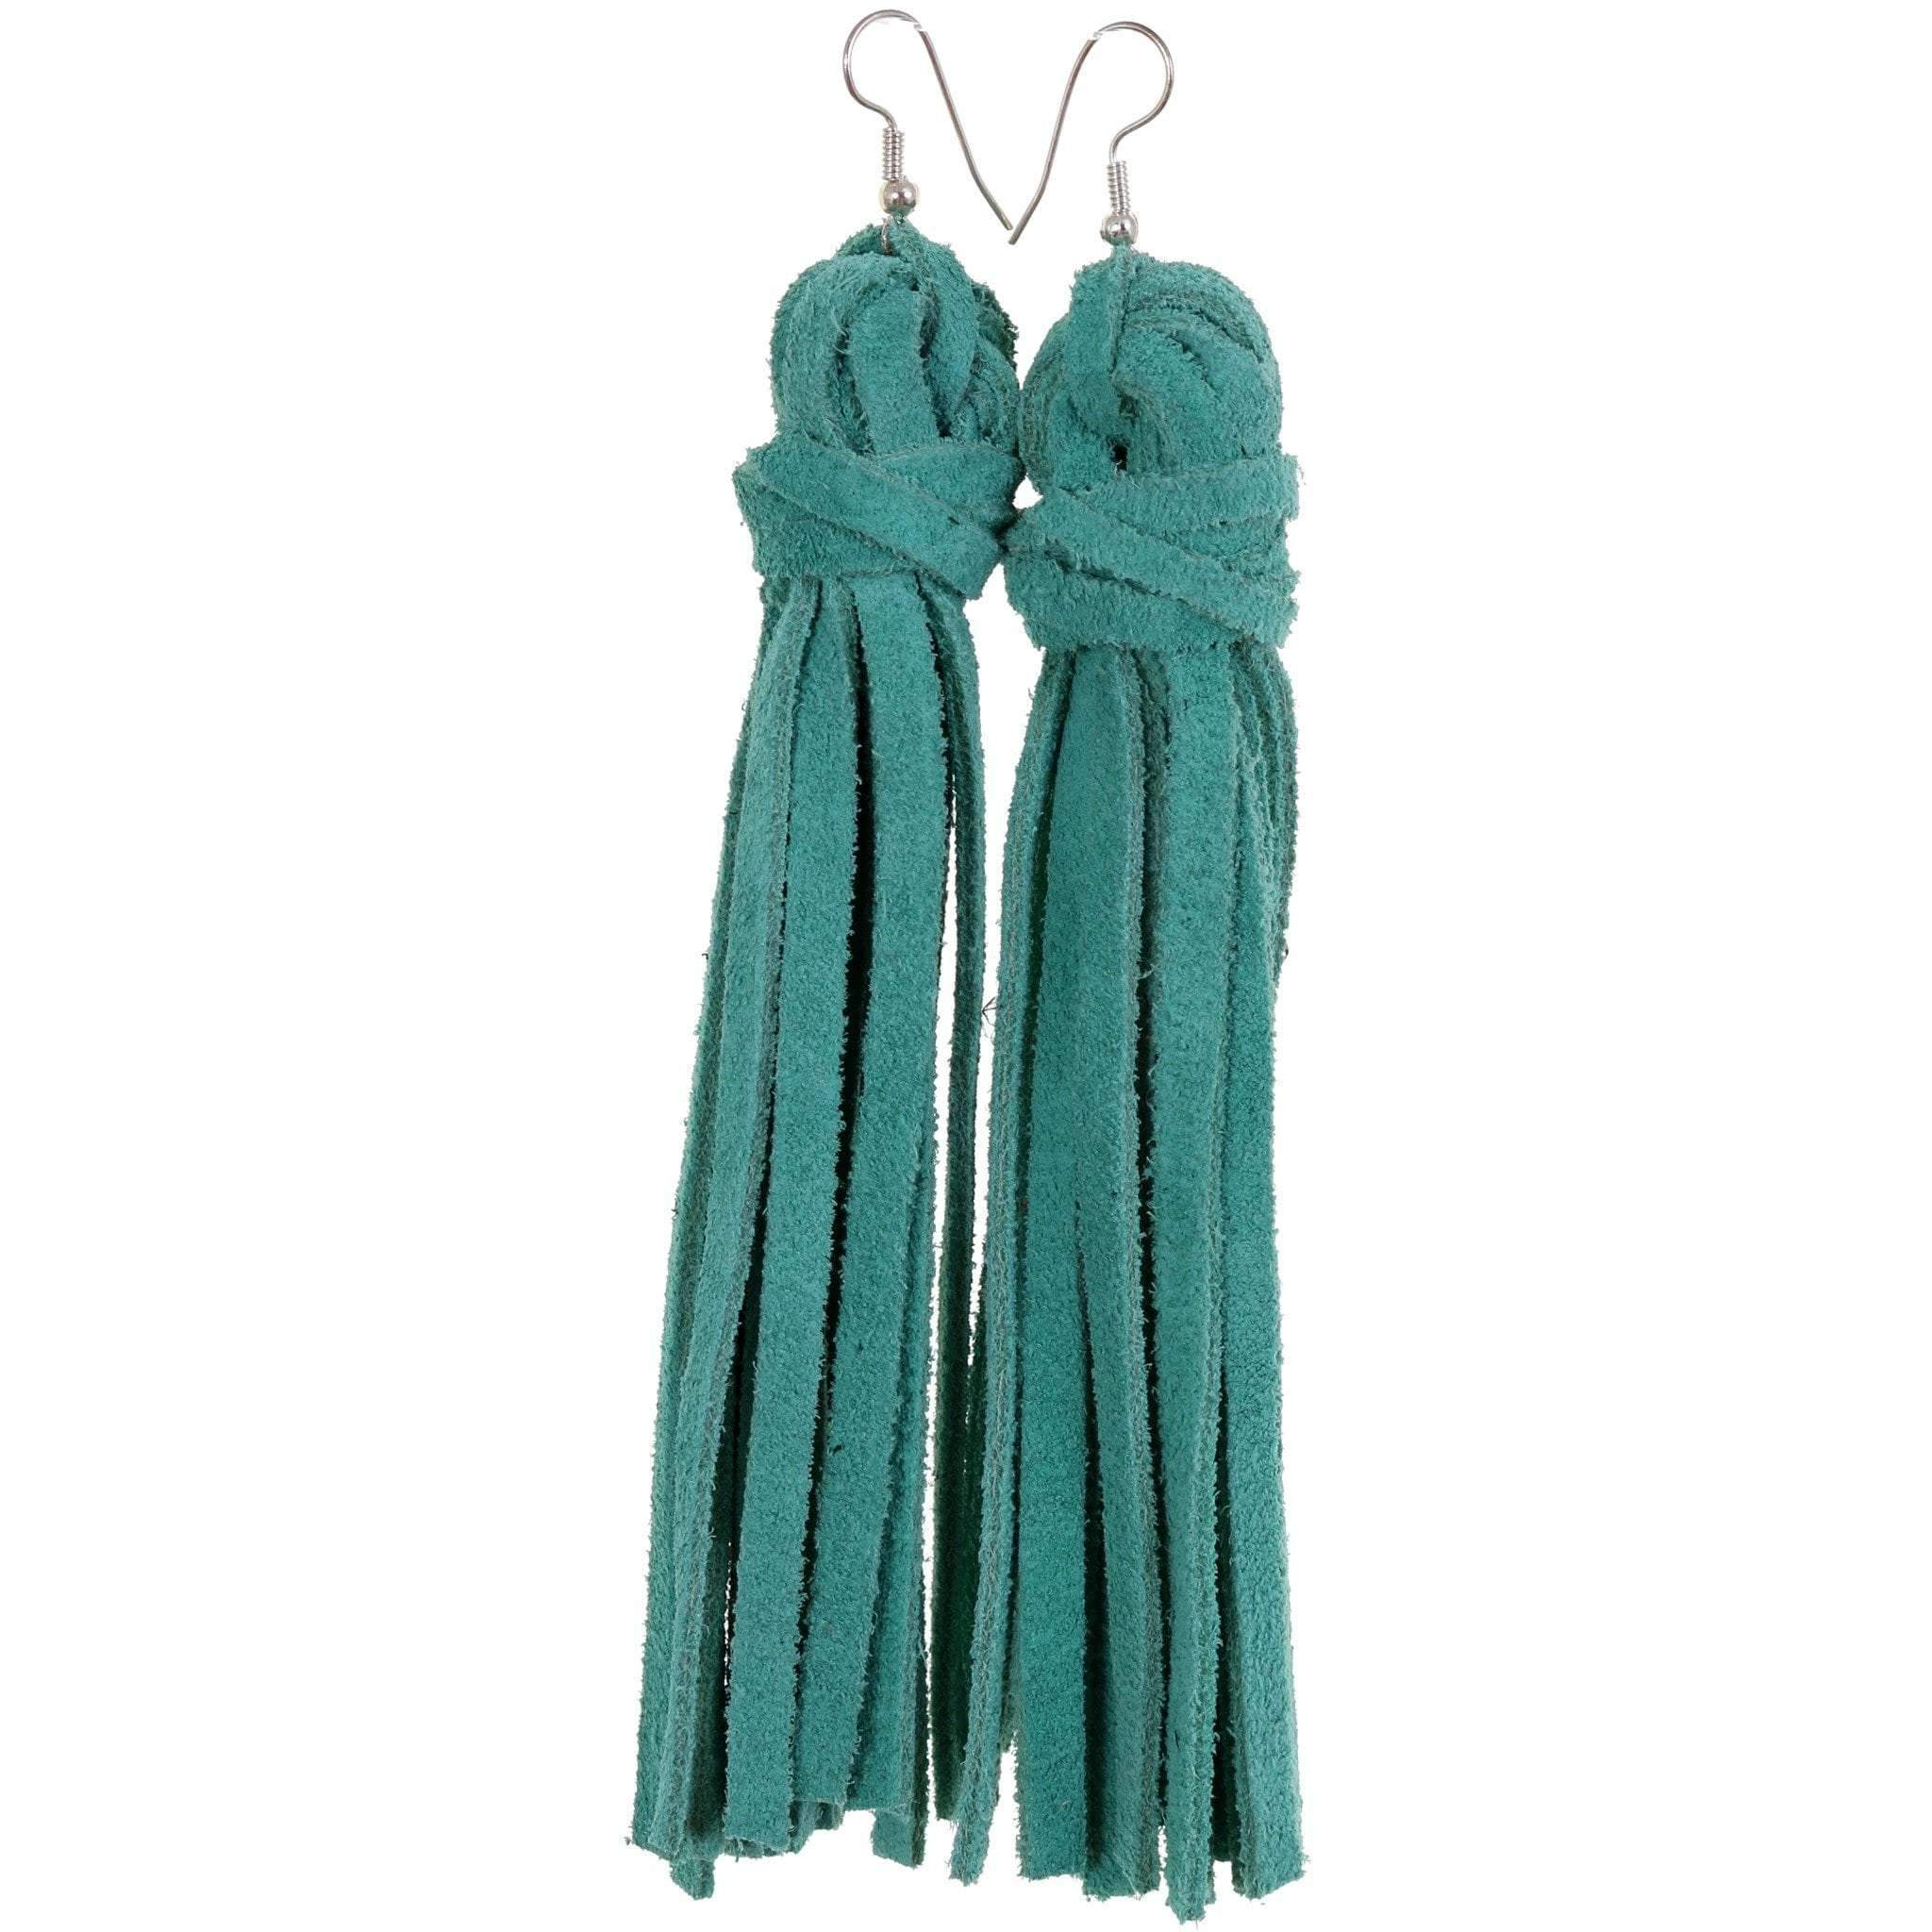 All-Natural Allure Turquoise Blue Stone and Suede Tassel Earrings -  Paparazzi Accessories